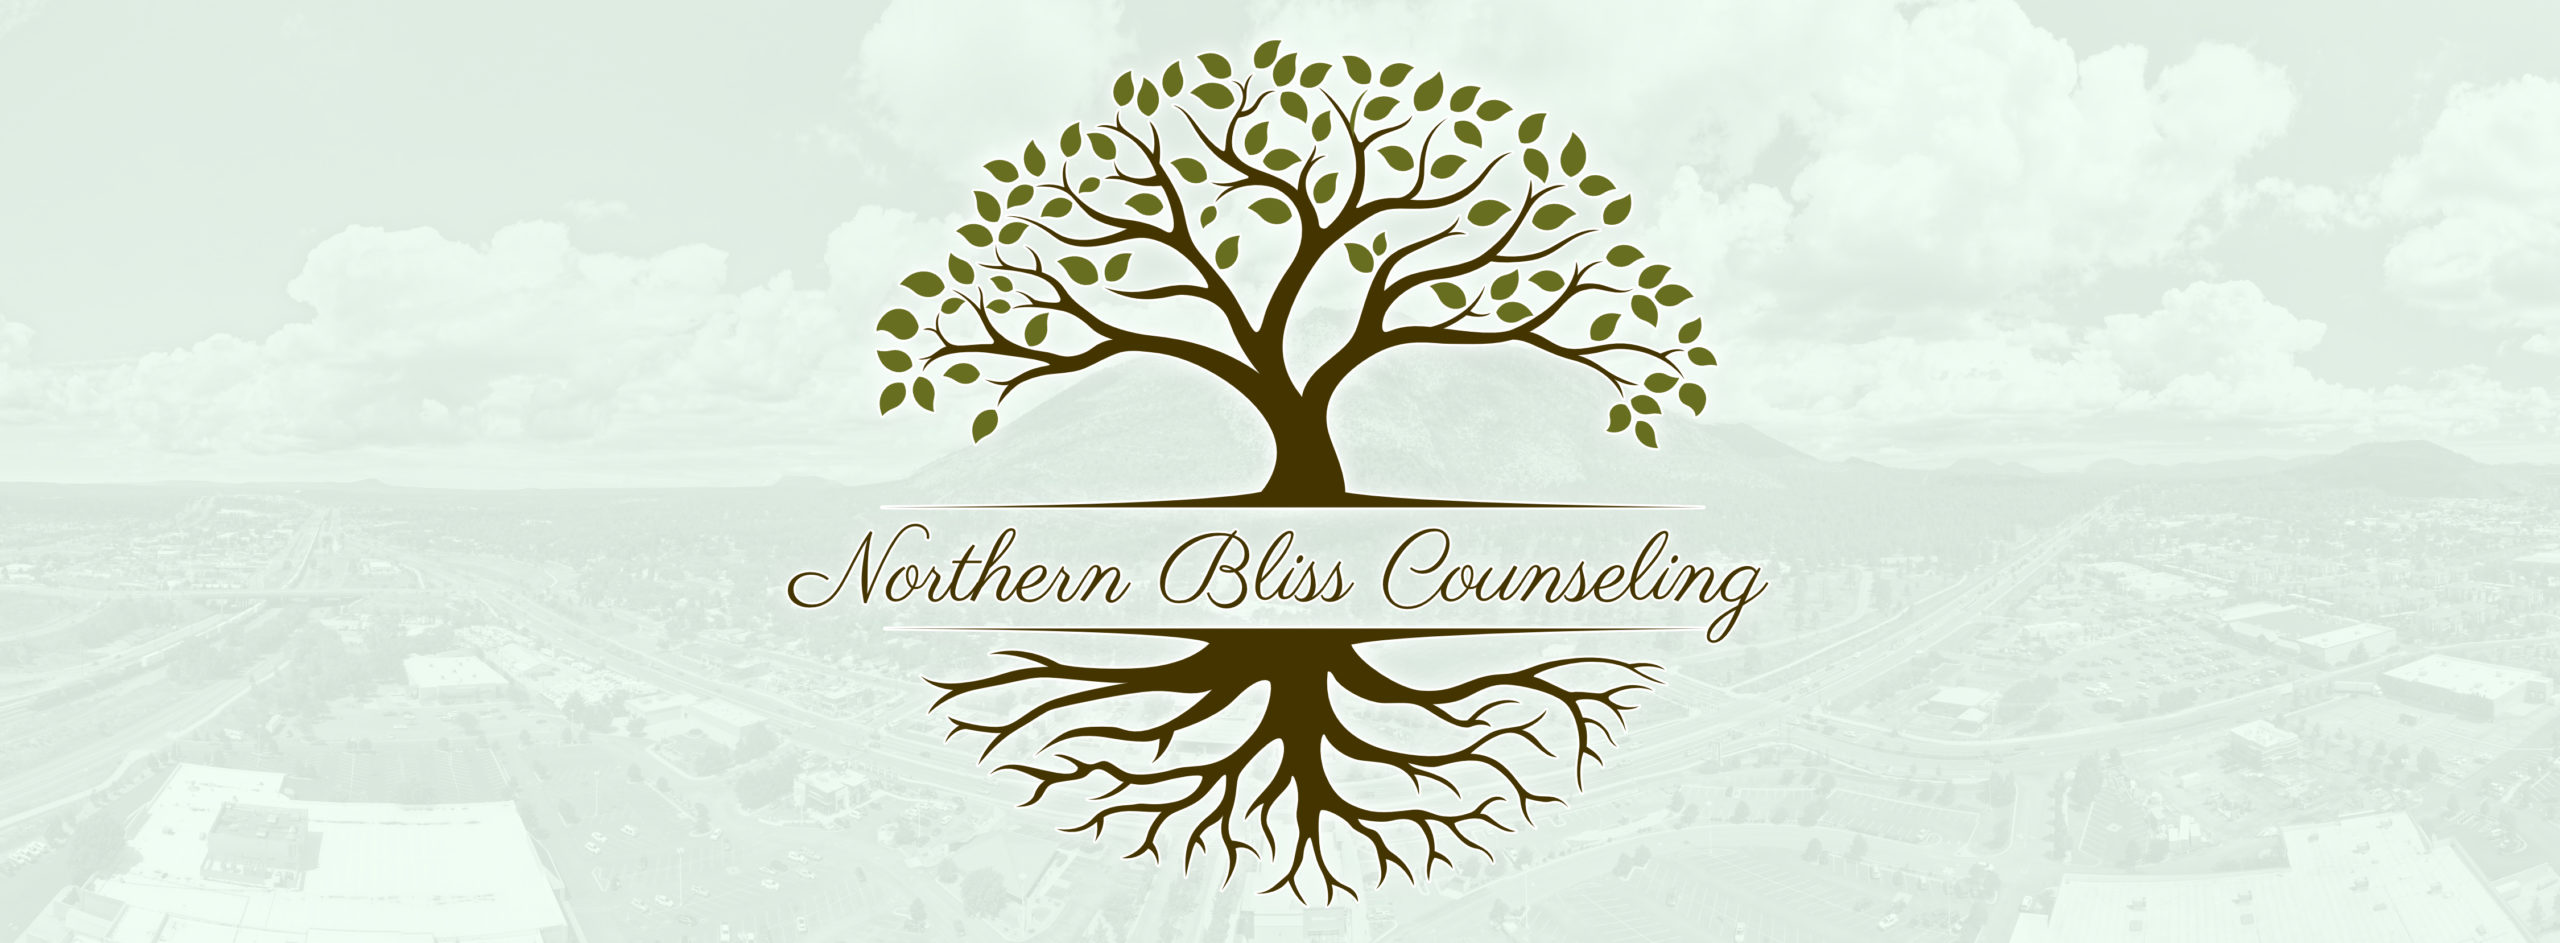 Northern Bliss Counseling Services, LLC Flagstaff Arizona